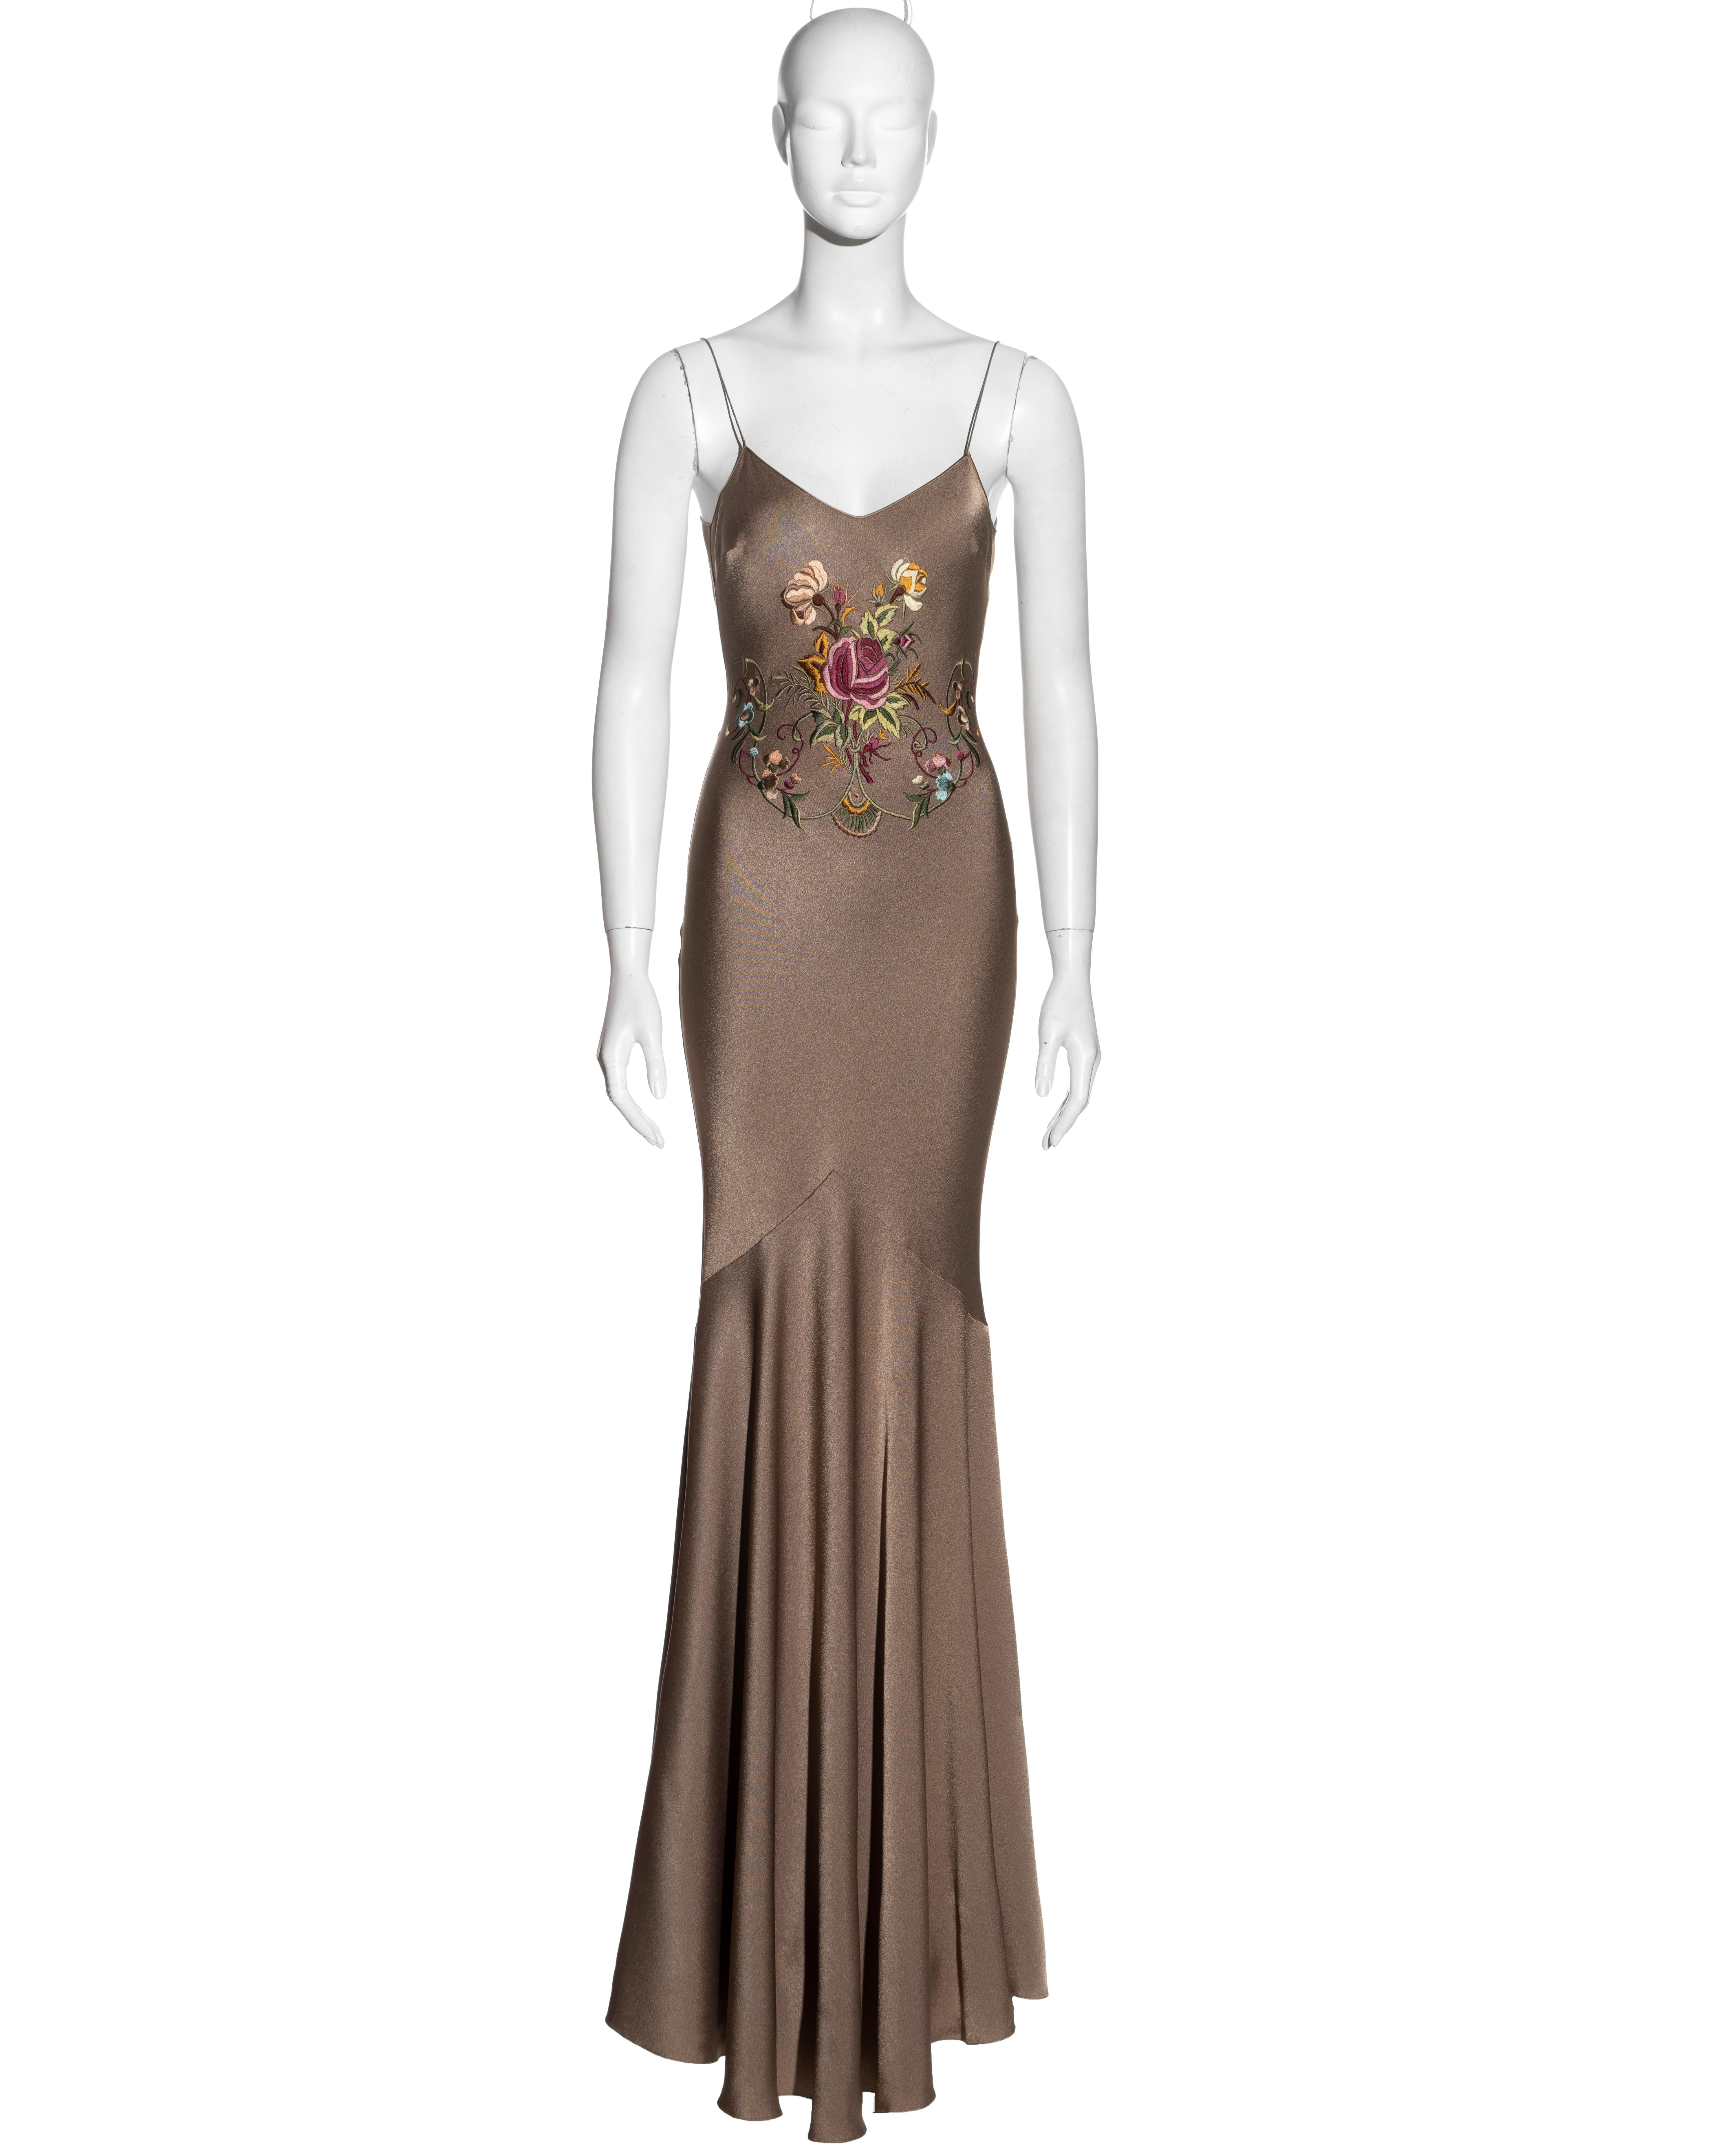 ▪ John Galliano bias-cut evening dress
▪ Taupe crepe-backed satin 
▪ Floral embroidery at the front and back 
▪ Floor-length skirt with train 
▪ Silk trim and spaghetti straps 
▪ Size French 38 
▪ Spring-Summer 2003
▪ 68% Acetate, 32% Viscose  Trim: